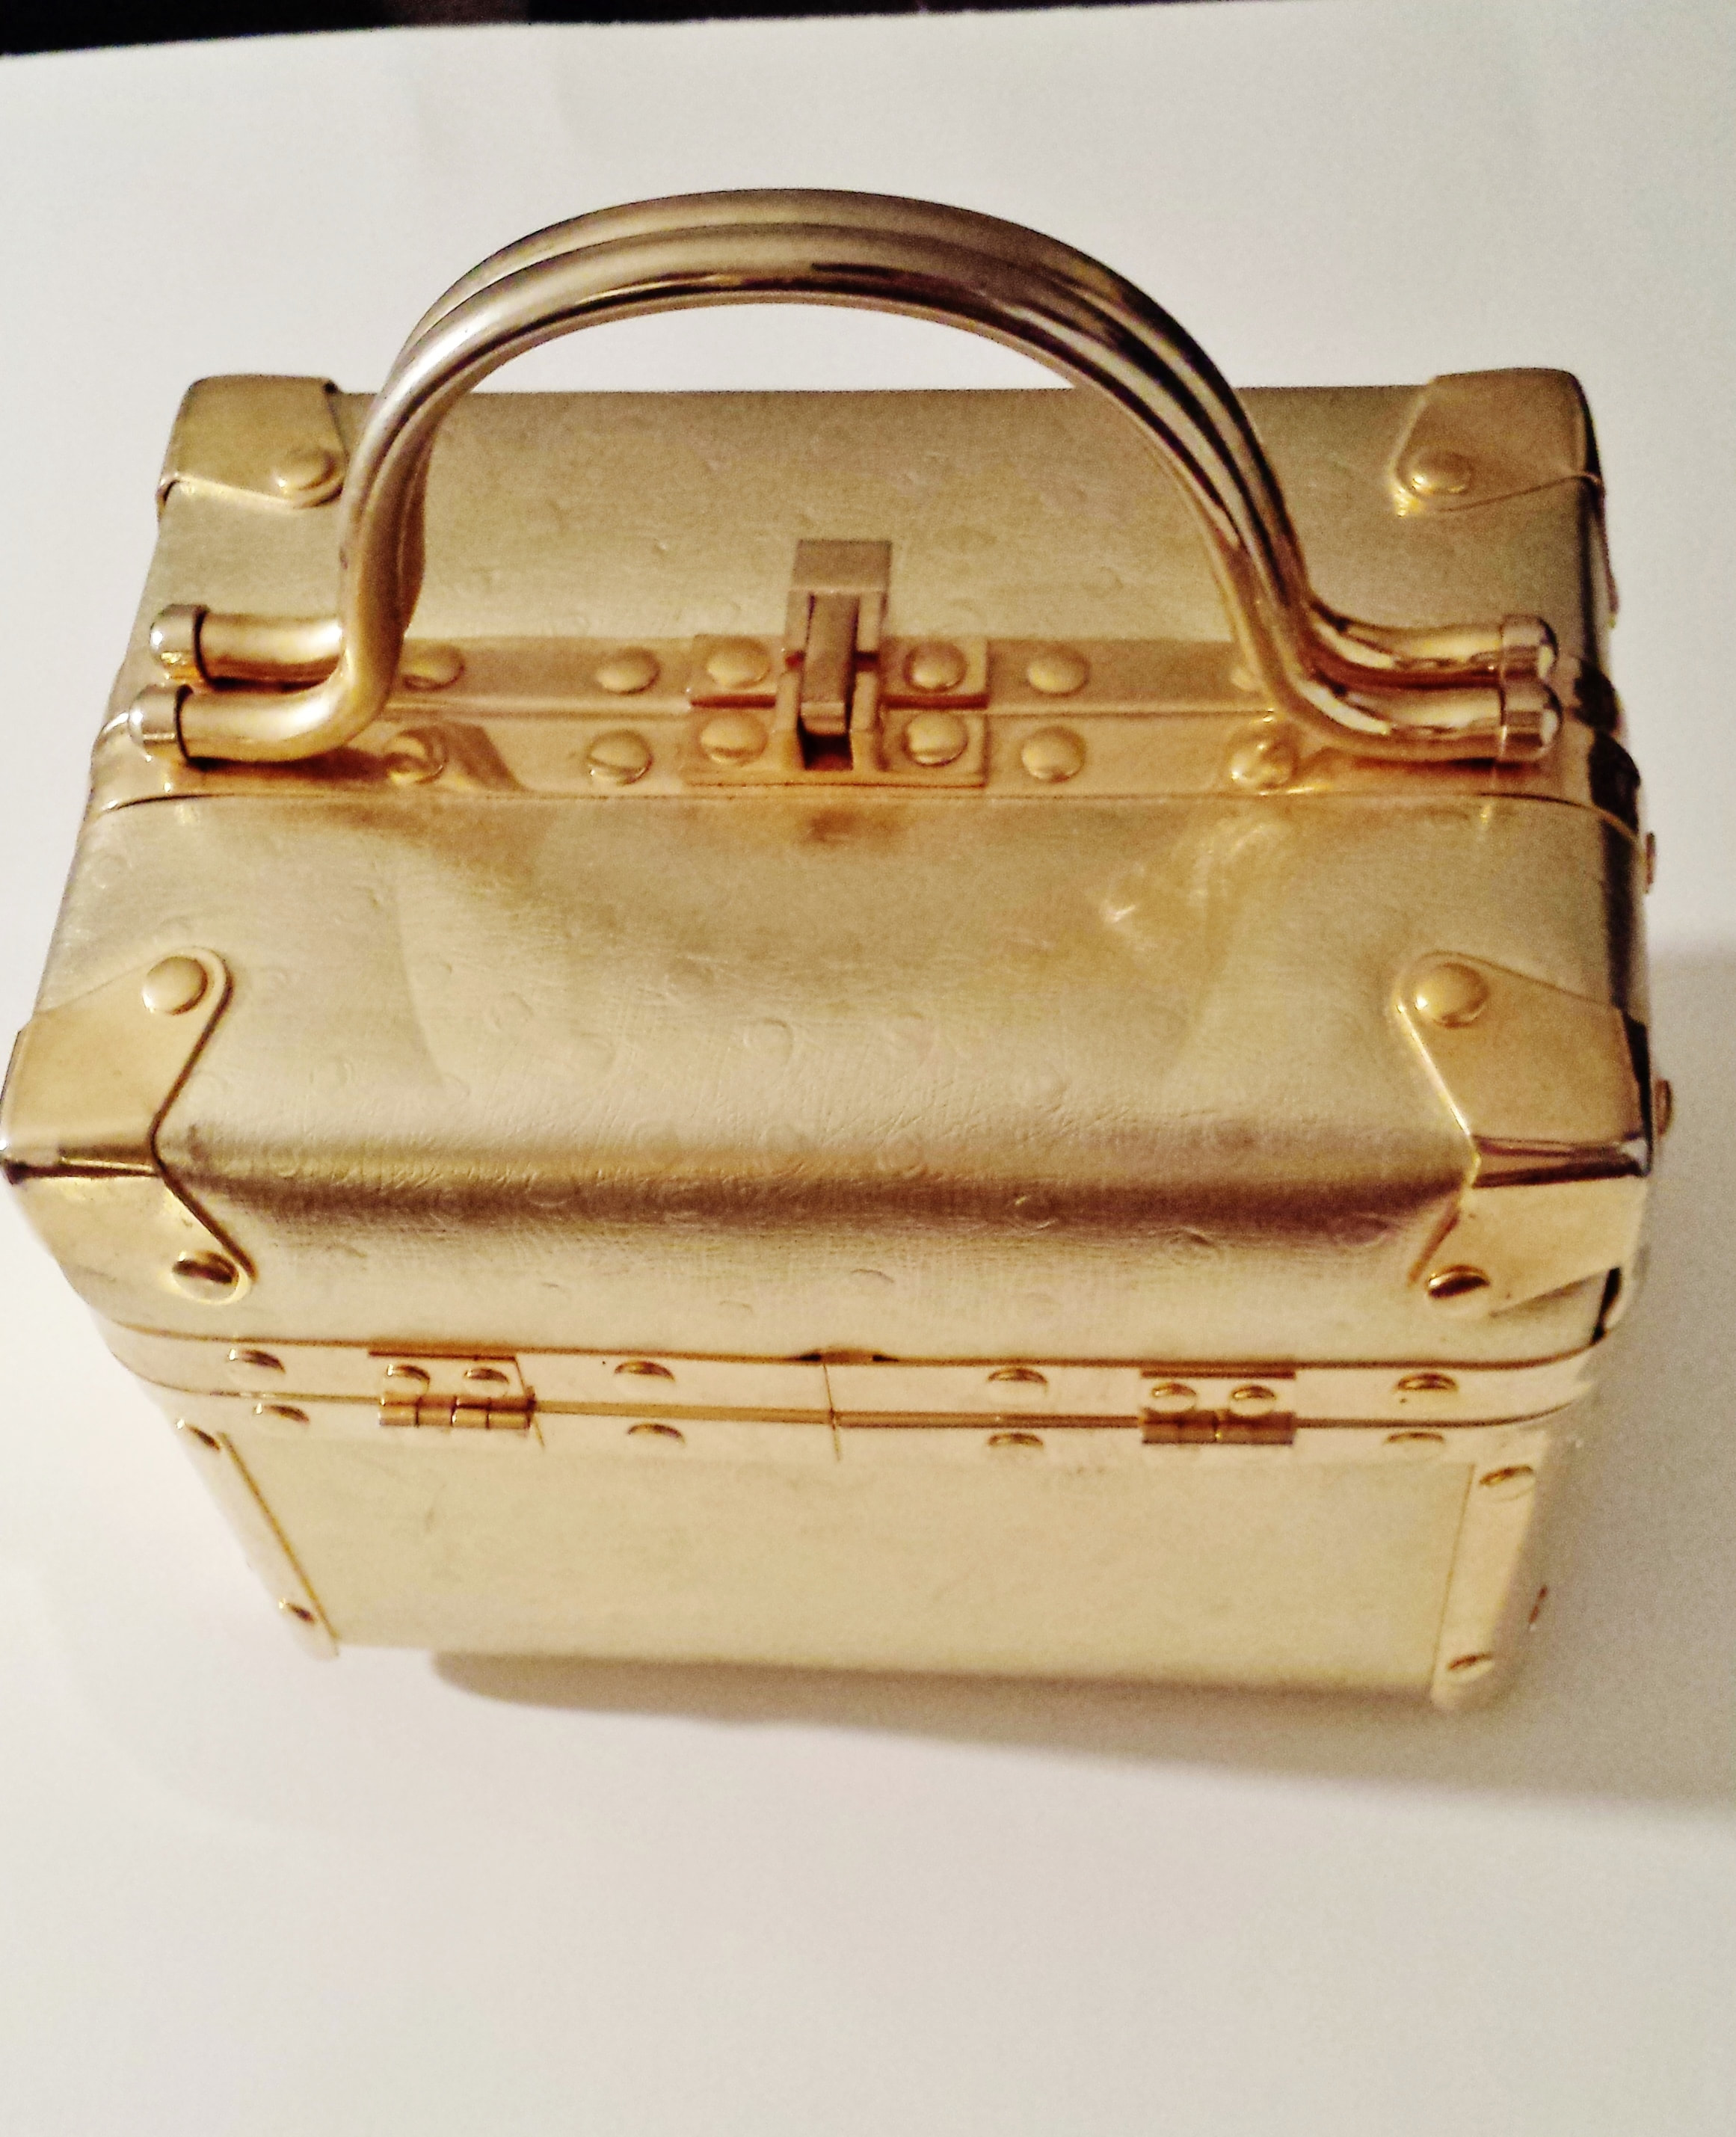 Gold Leather Hand Bag, Box Style, Travel Trunk Purse, Chic Stylish Vintage  Bag